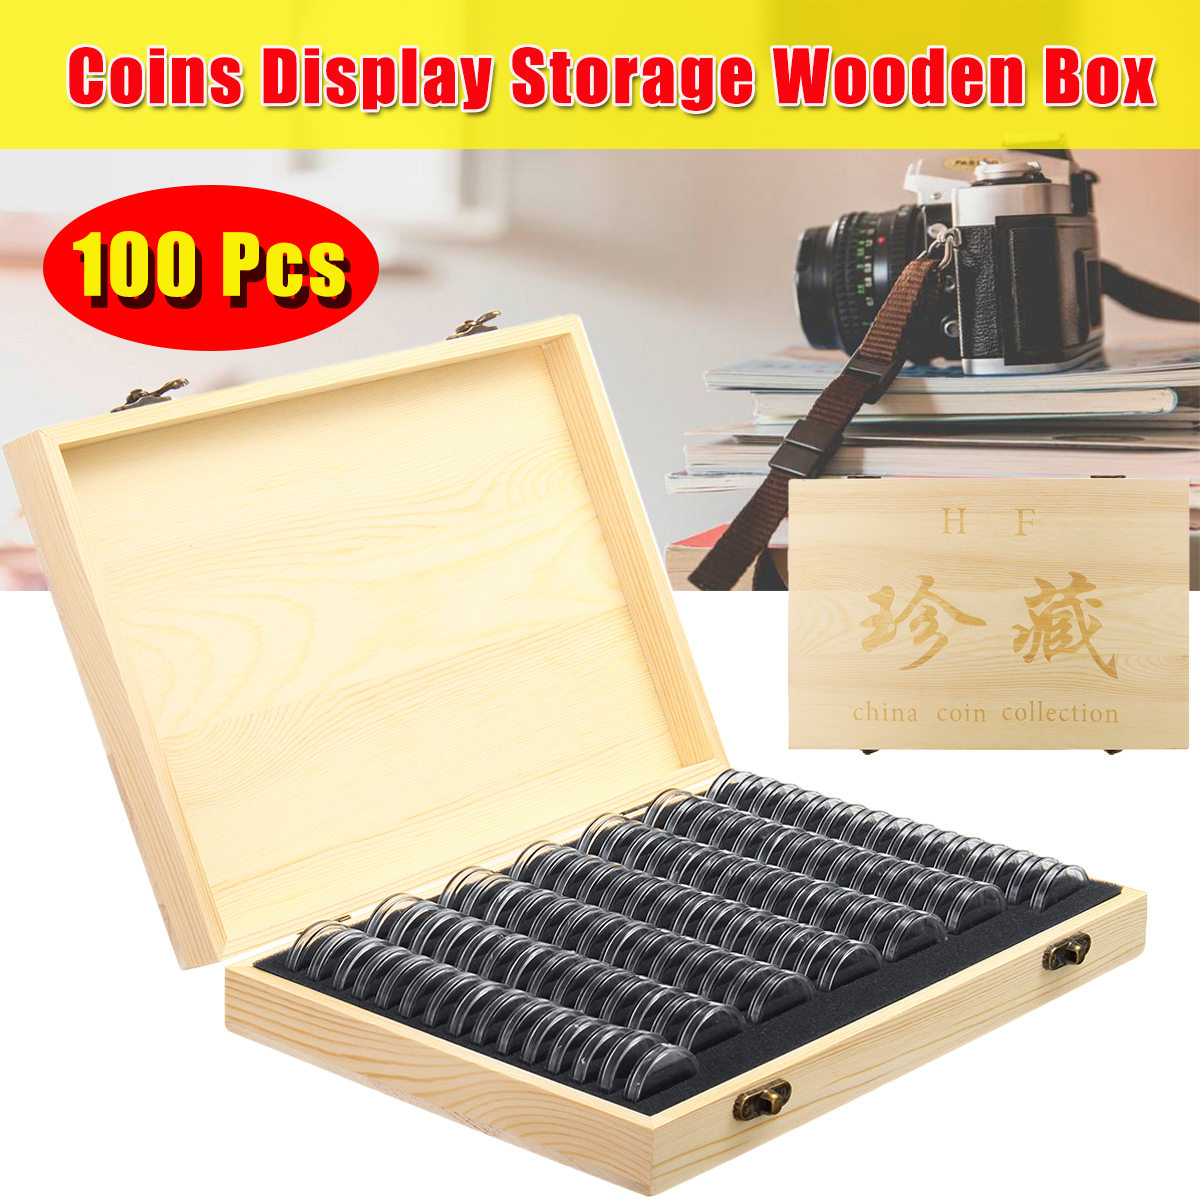 100PCS-Rugged-Wooden-Commemorative-Coin-Display-Case-Capsule-Holder-Storage-Collection-Box-1646129-1